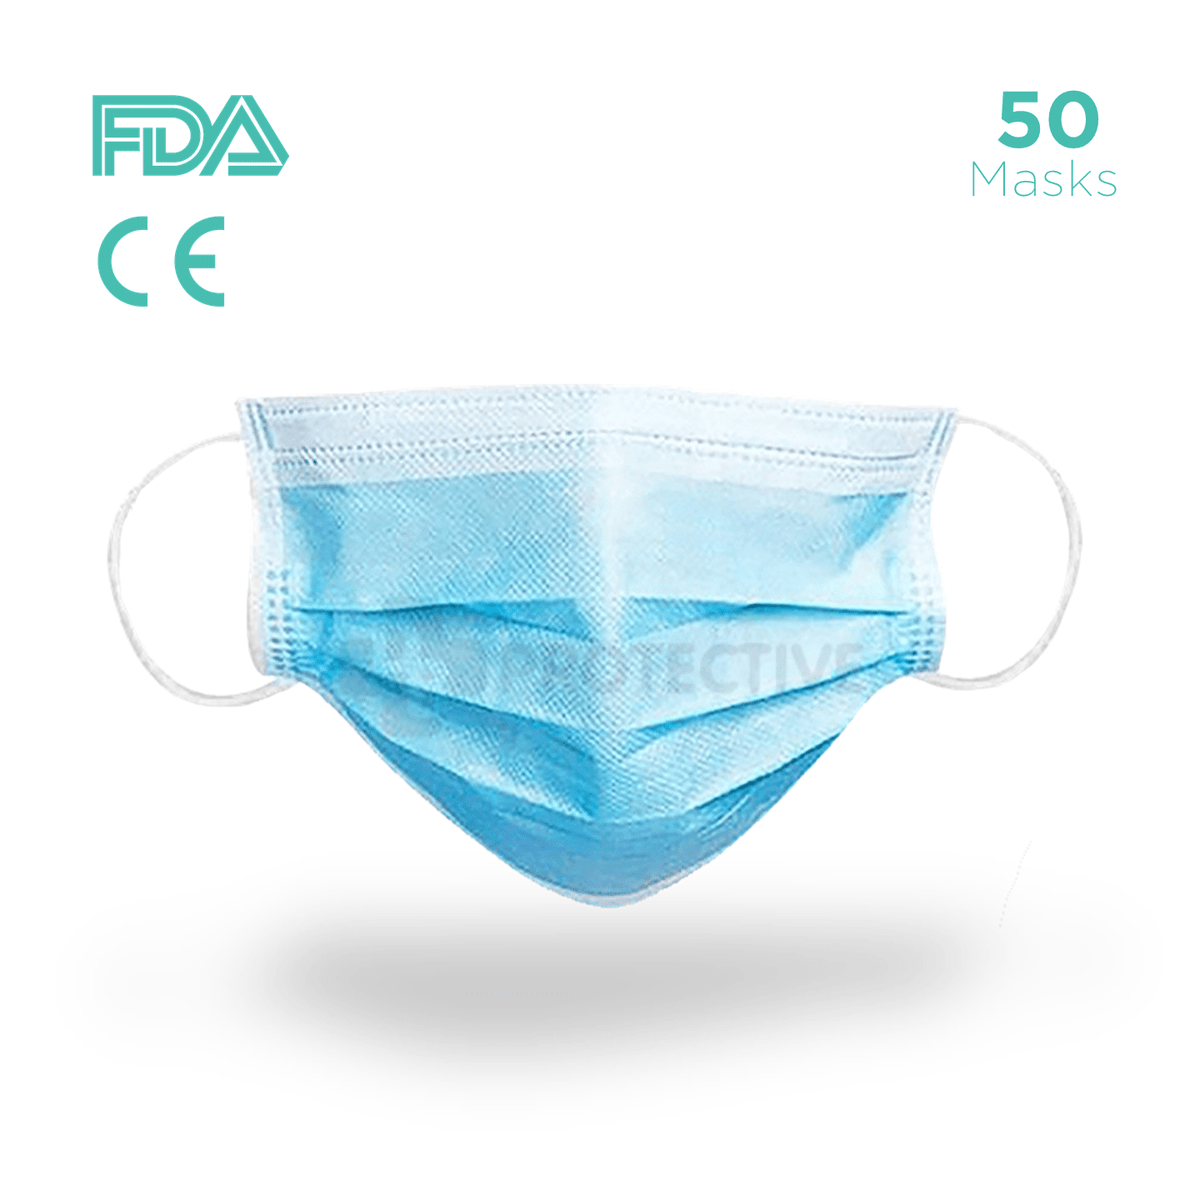 3-Ply Disposable Surgical Medical Face Mask (Level 2) - Pack of 50 - USA Medical Supply - DB Protective